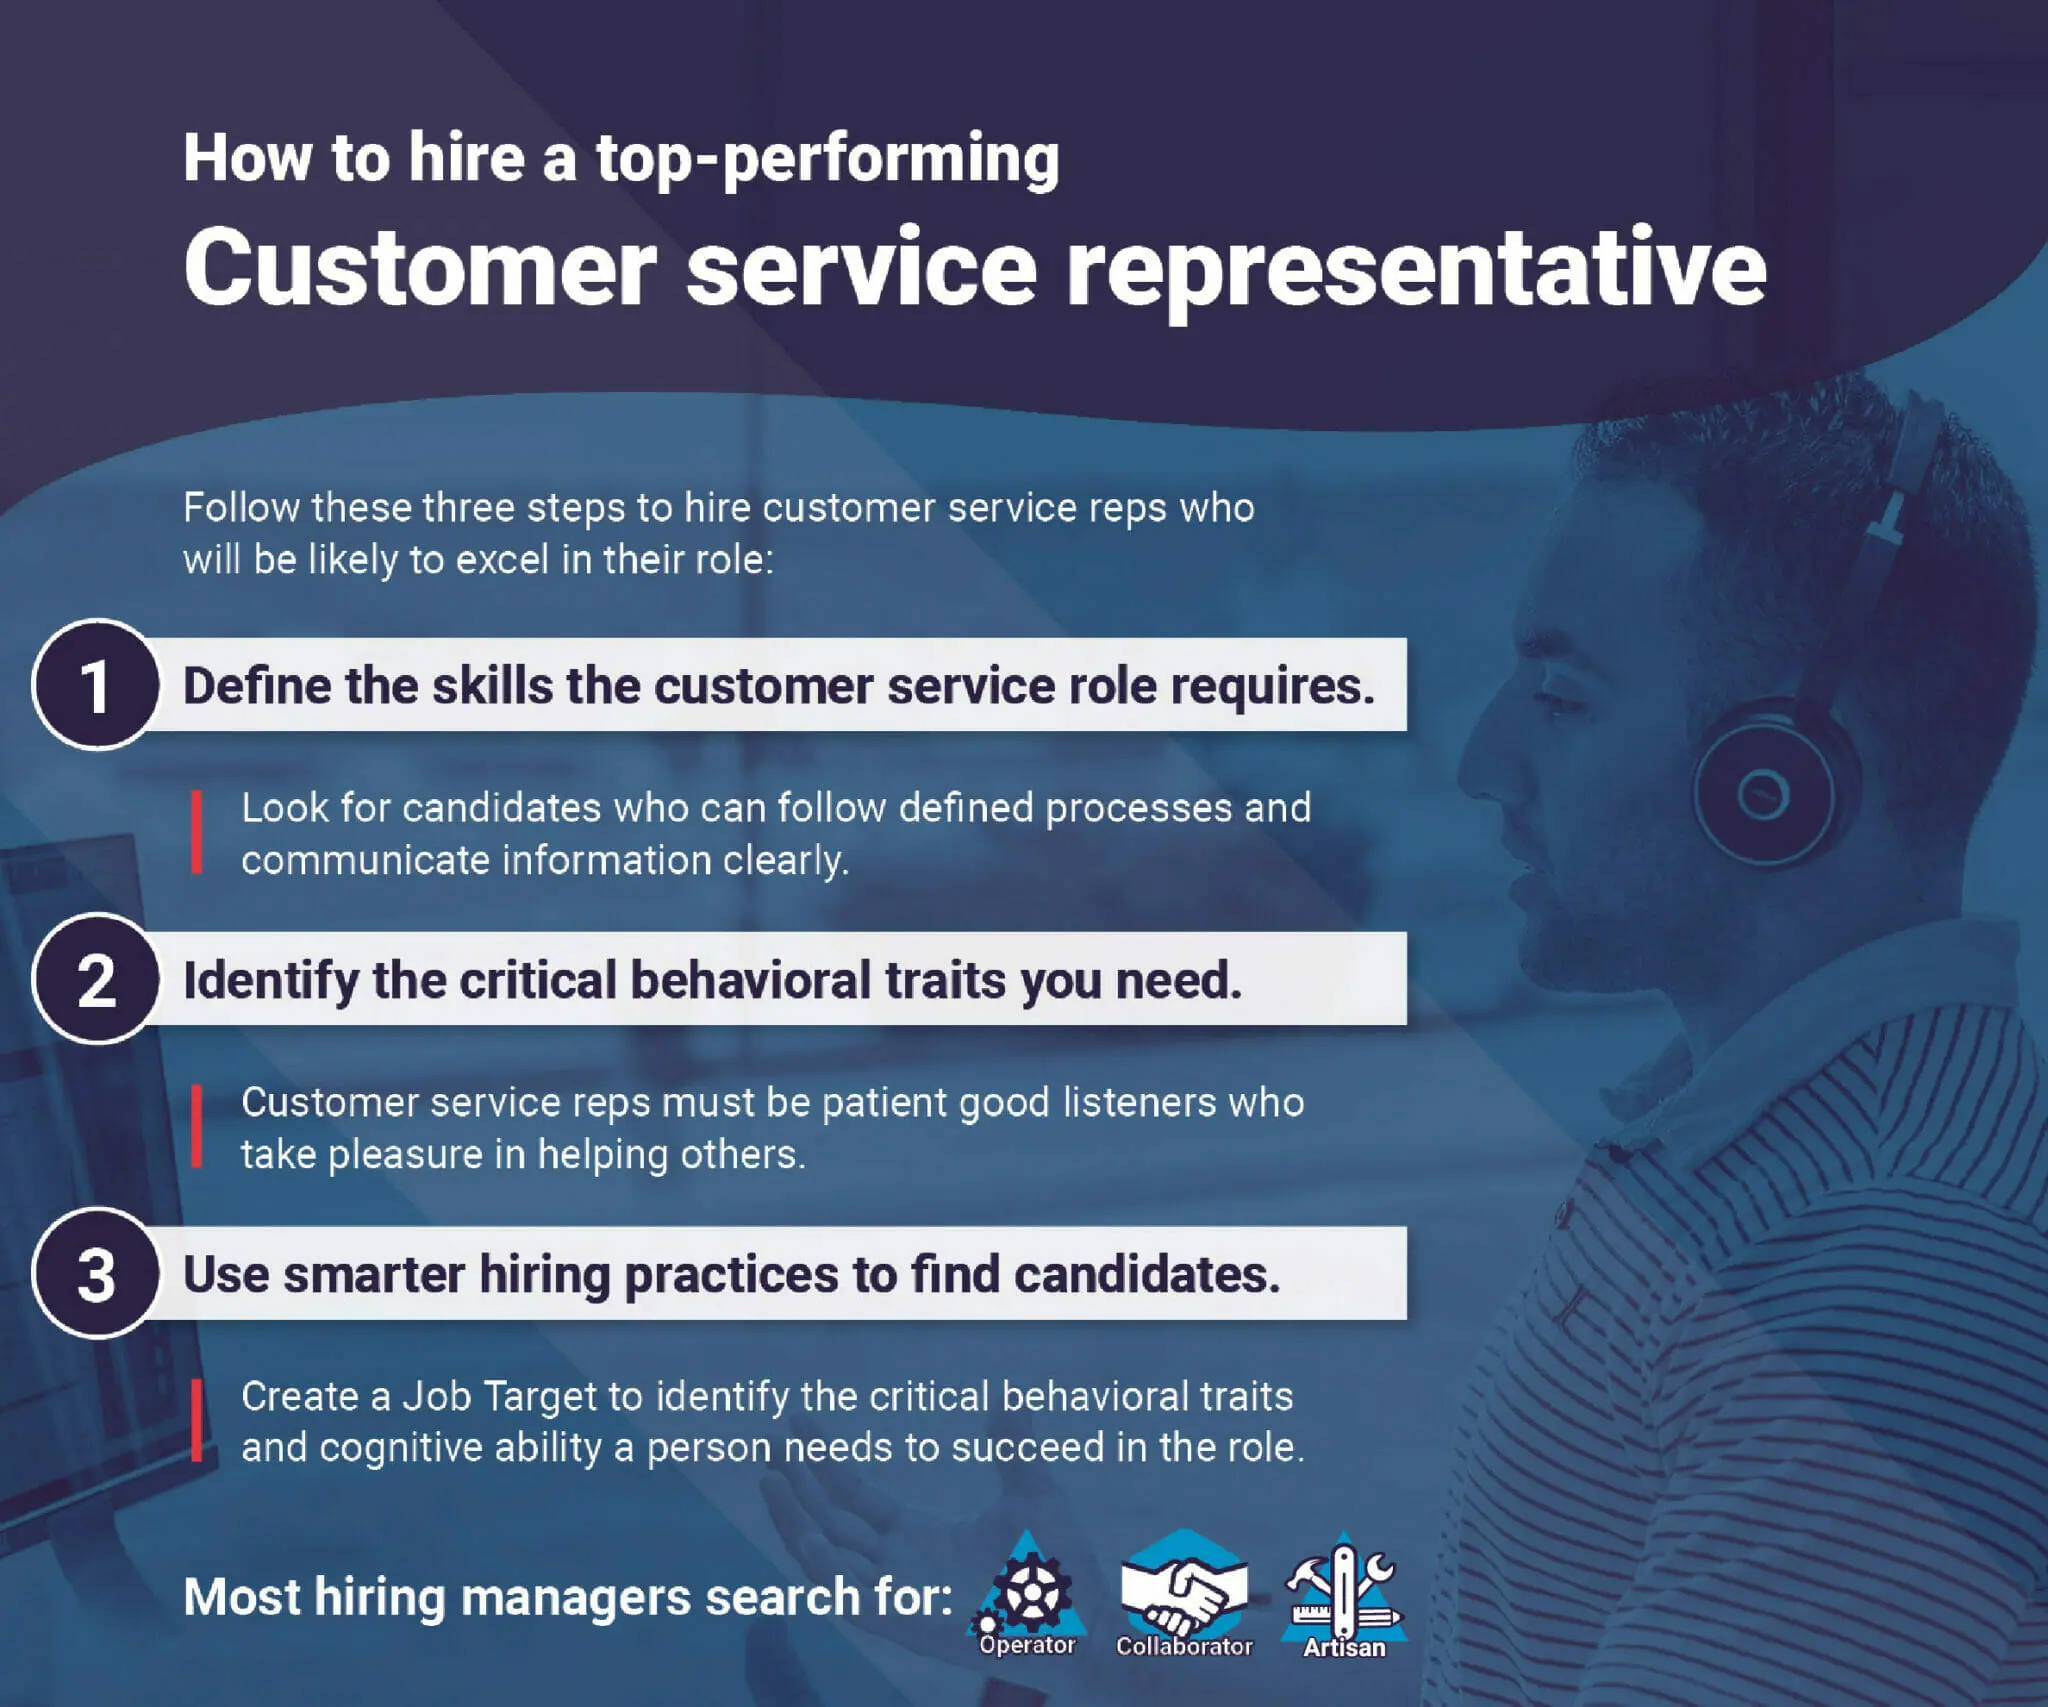 Online Candidate Client Service Offerings